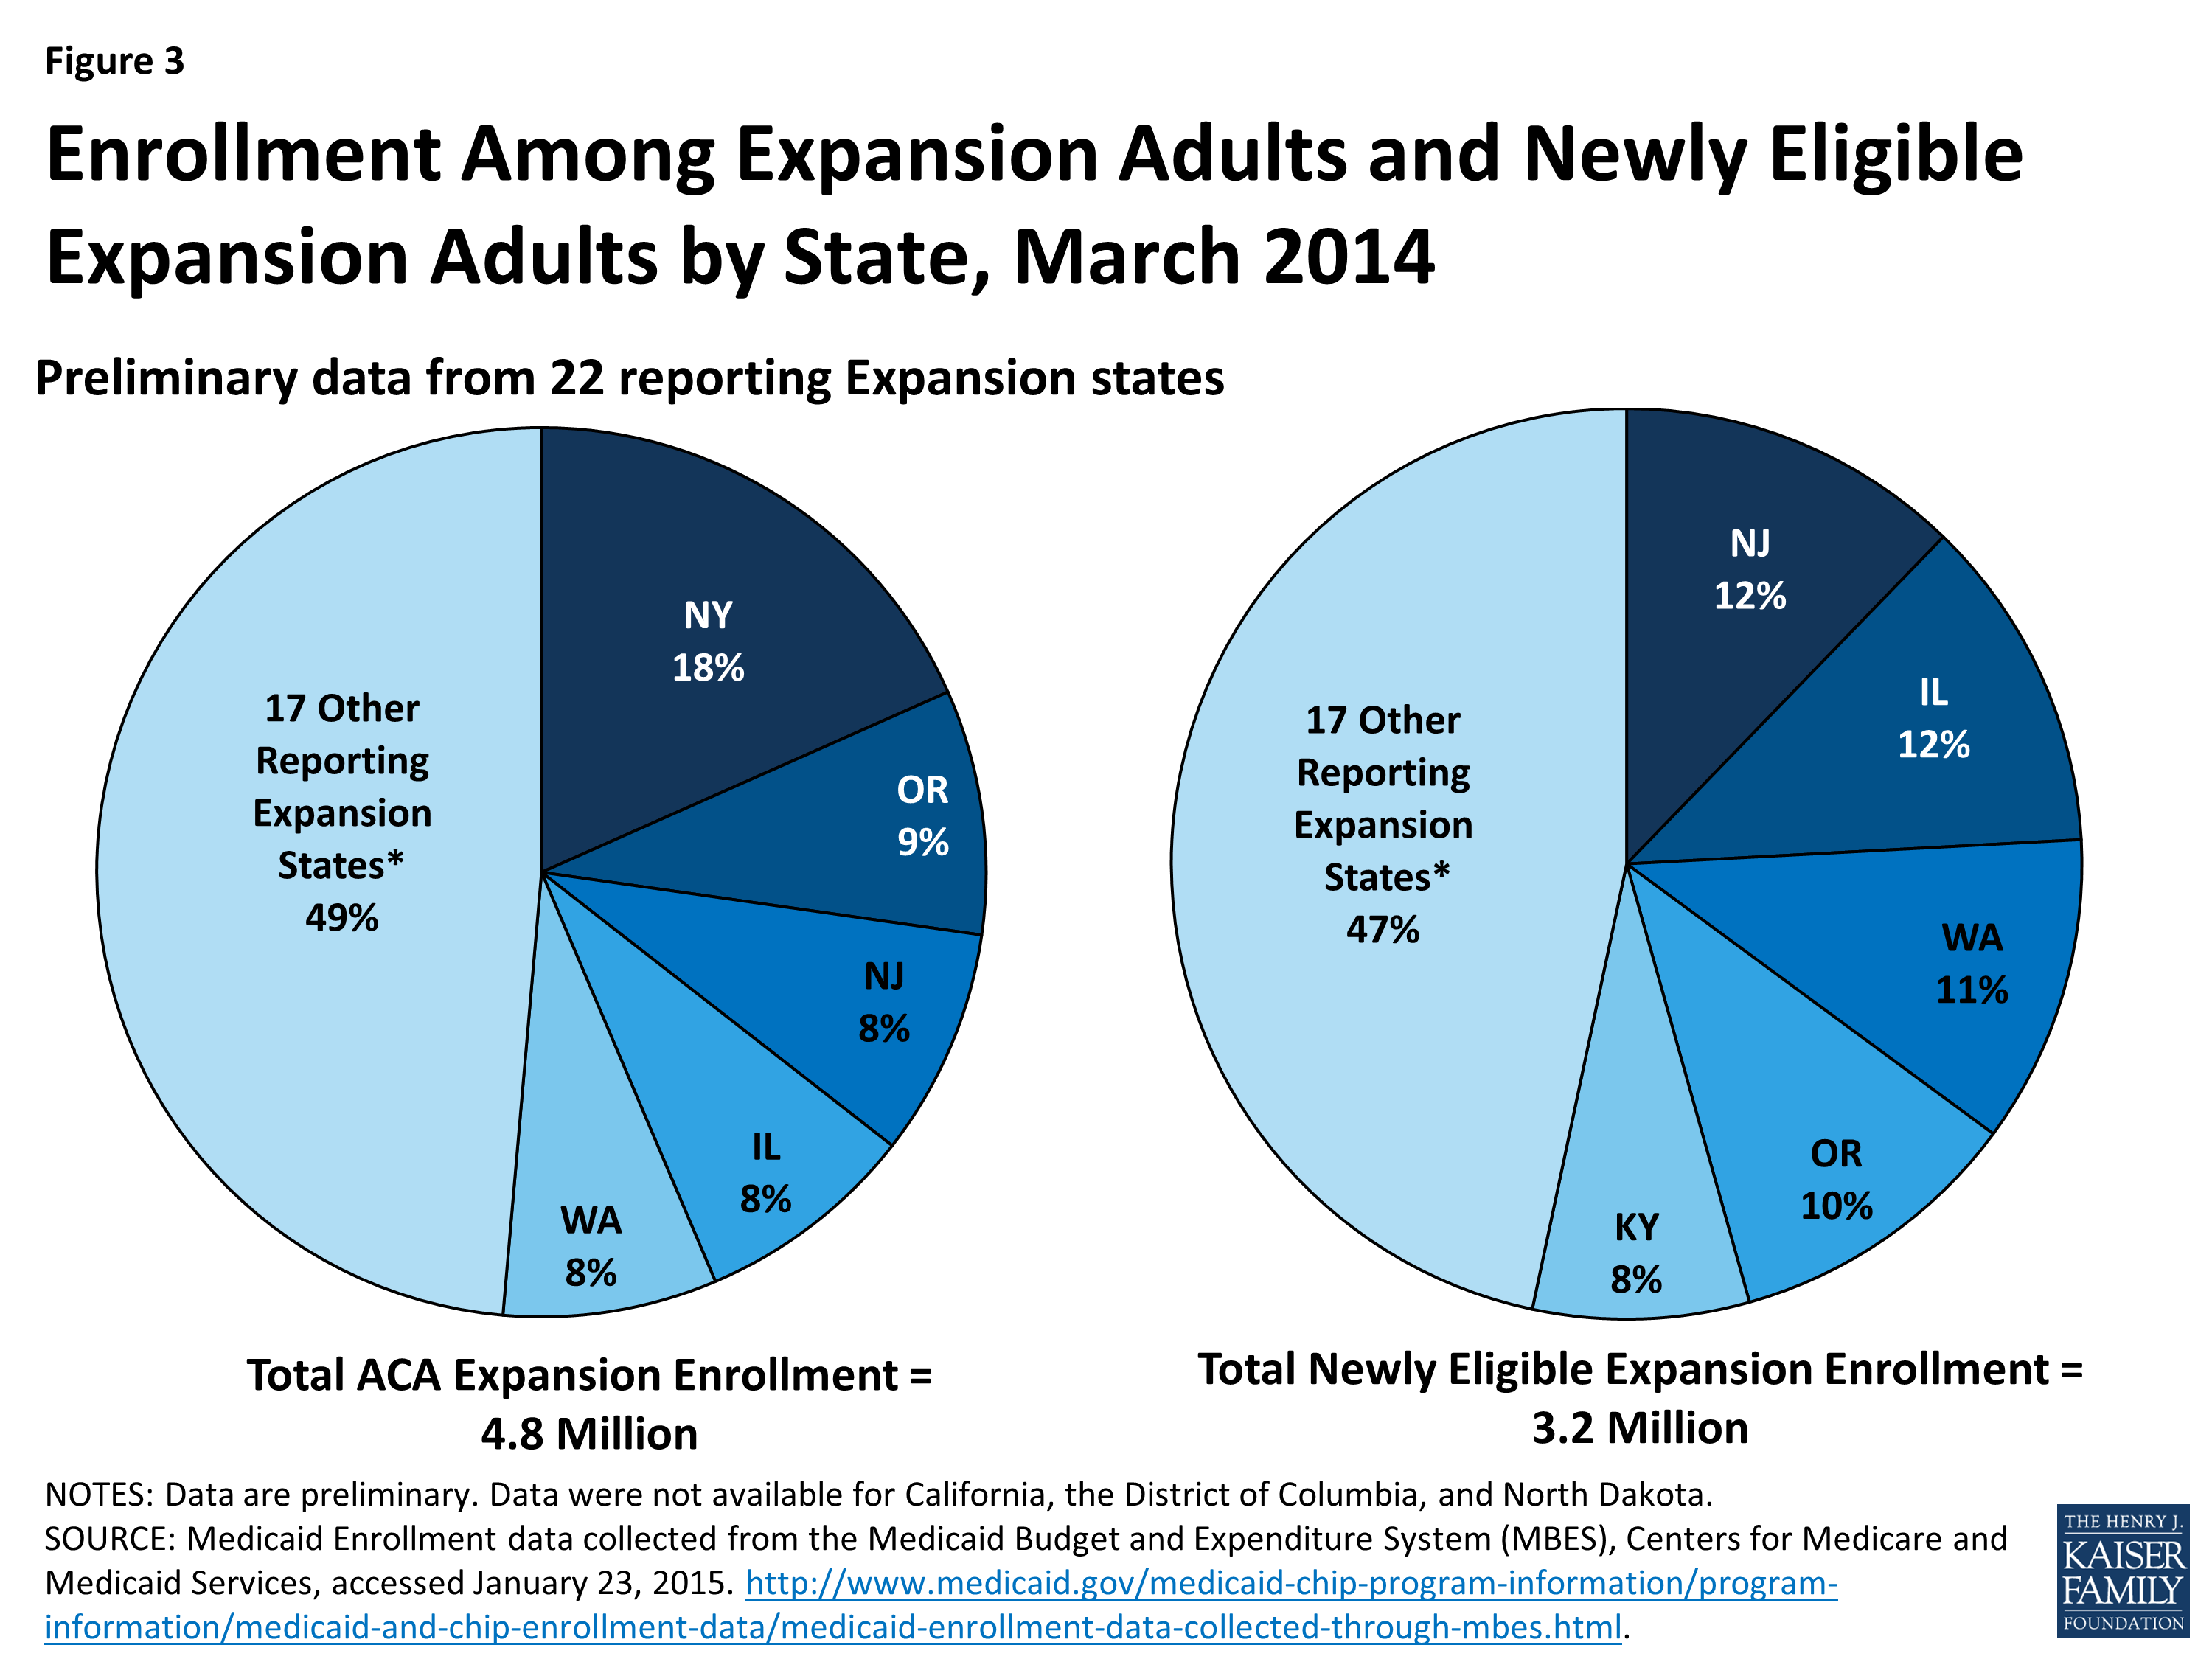 An Overview of New CMS Data on the Number of Adults Enrolled in the ACA